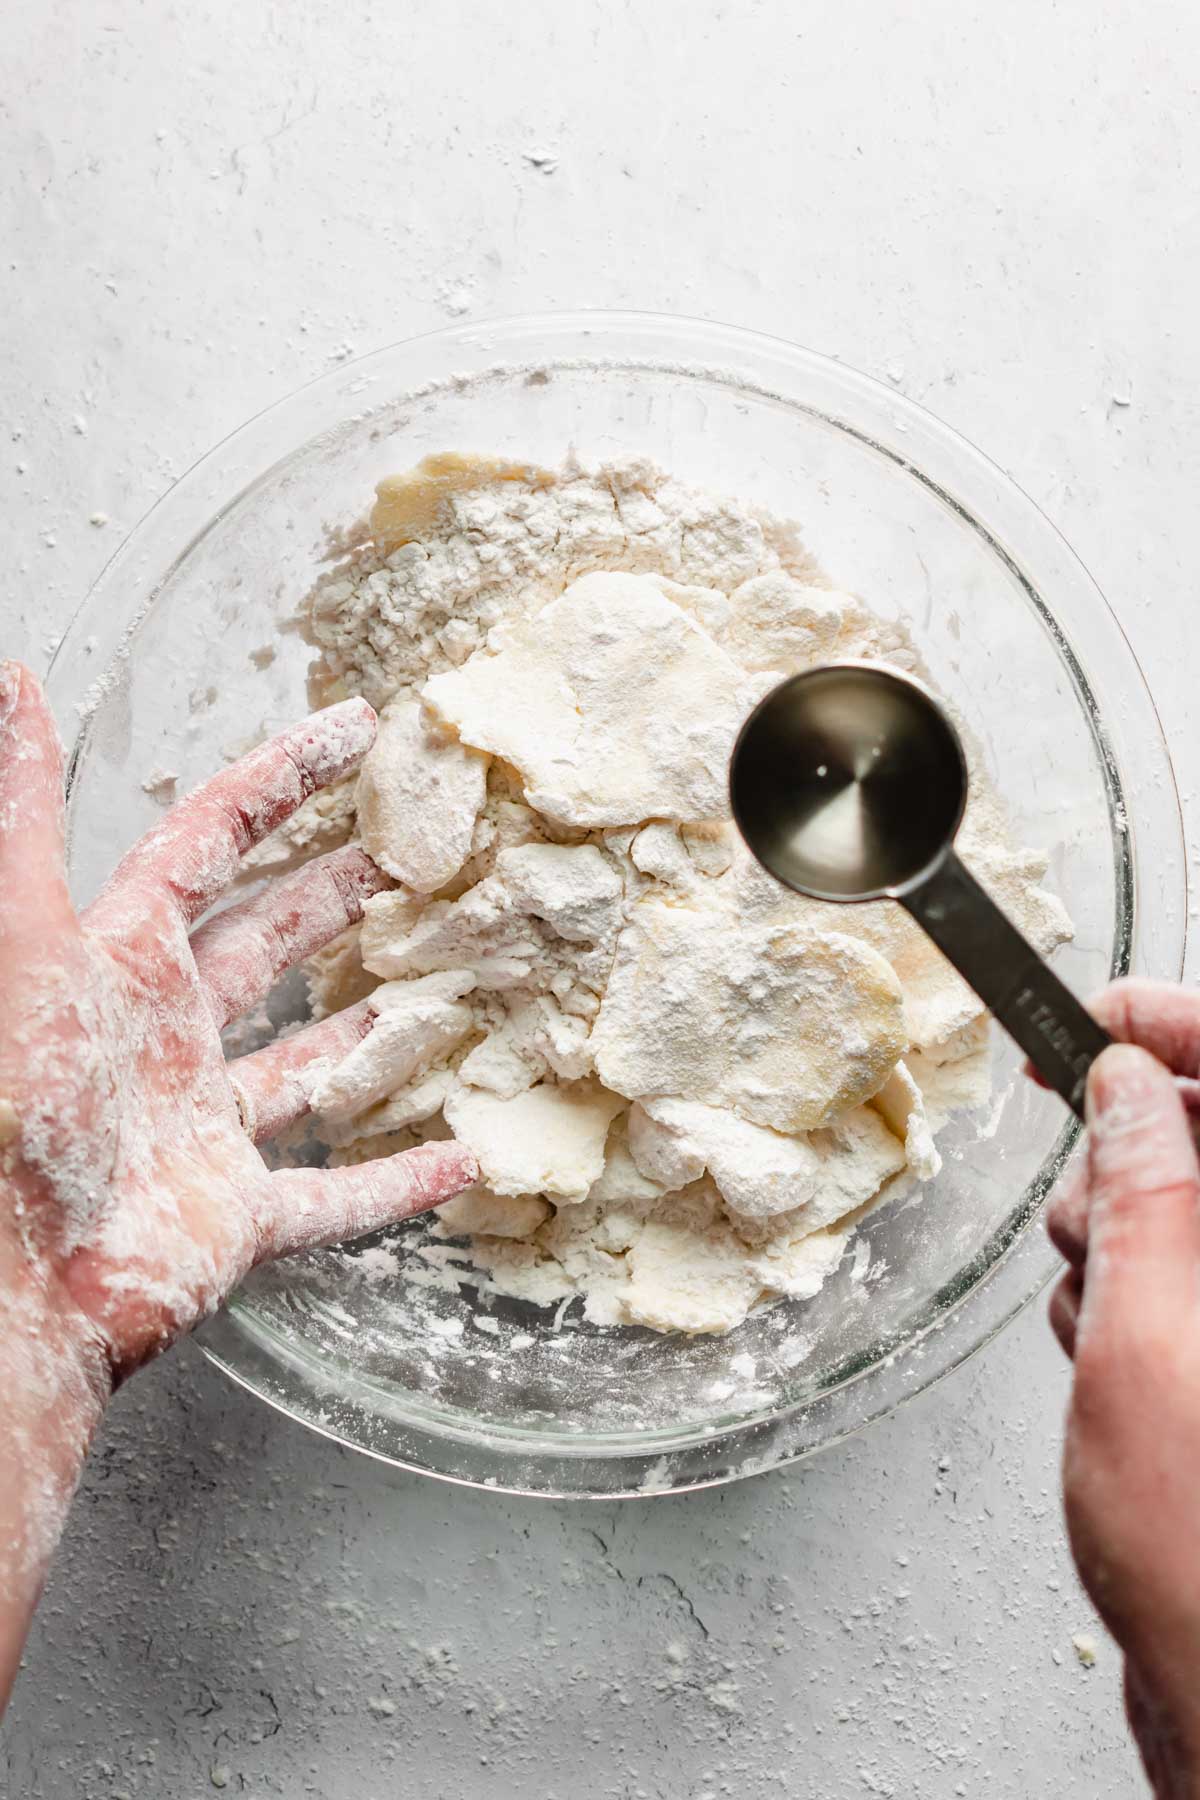 A tablespoon of water is added to the butter and flour.